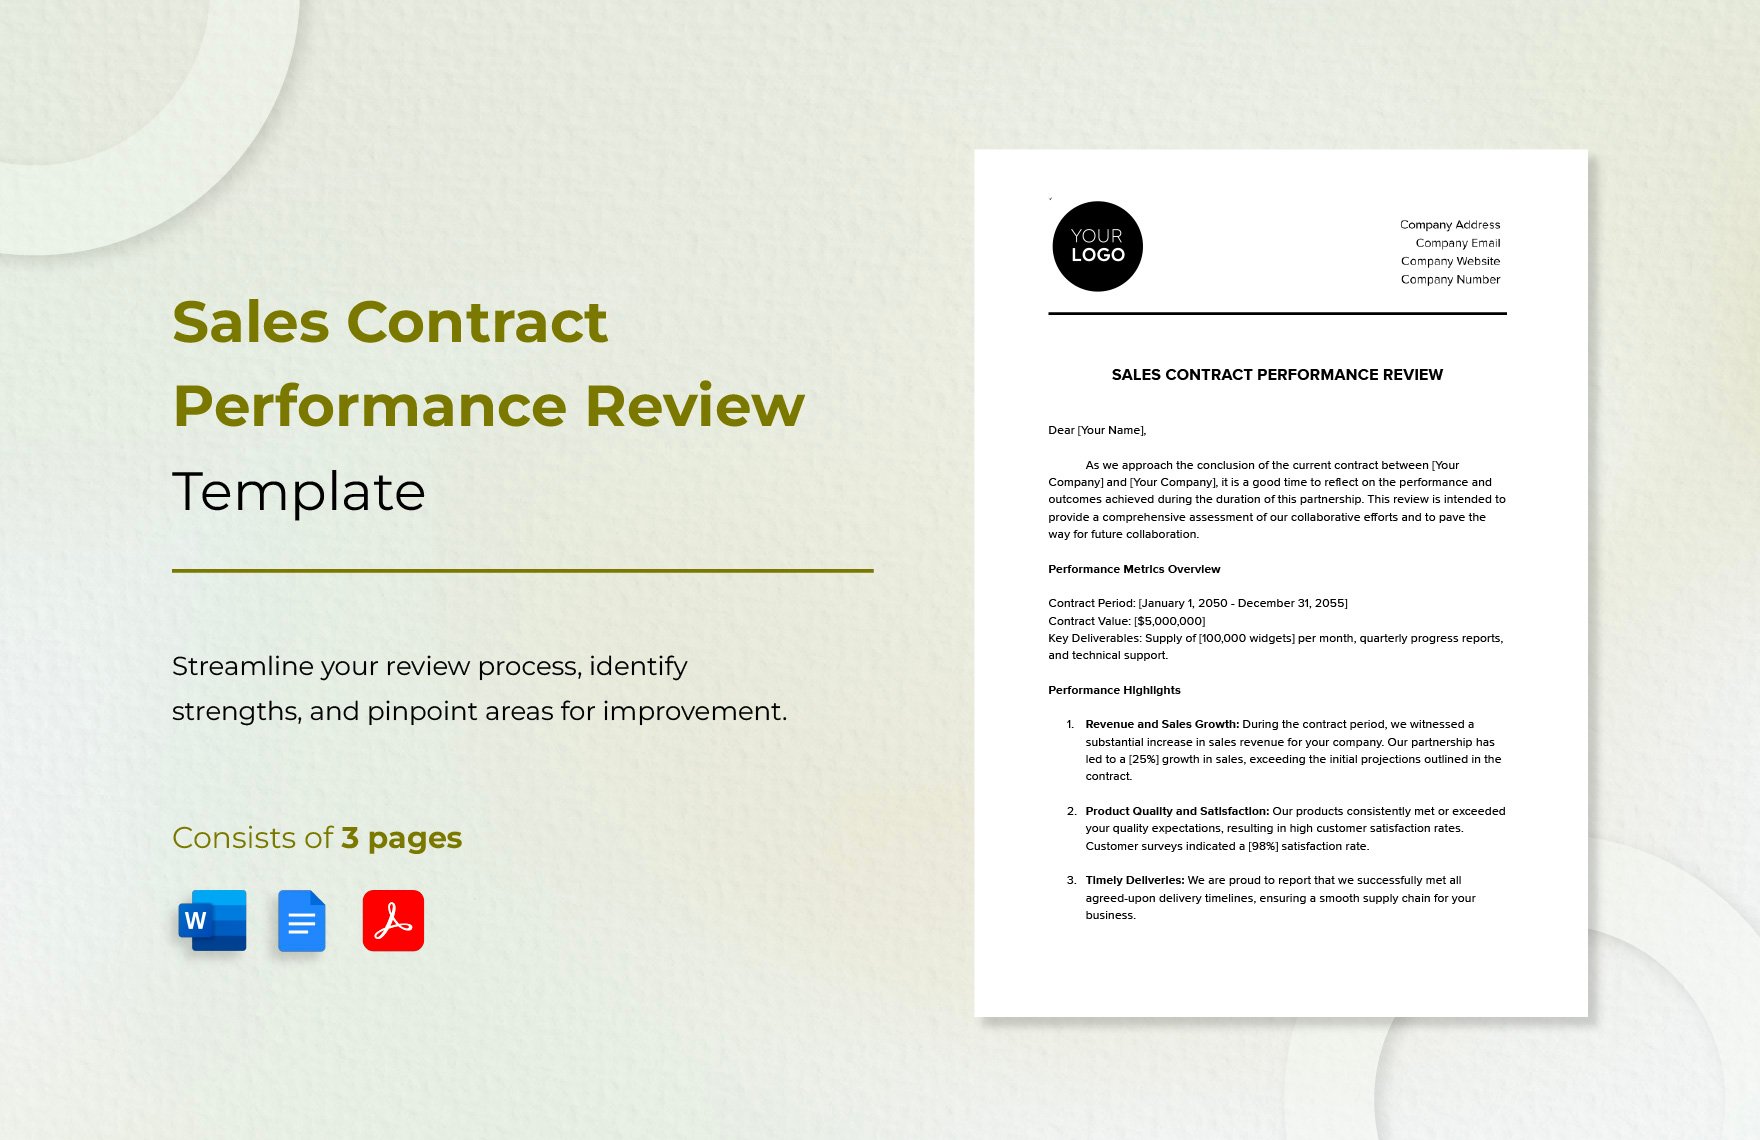 Sales Contract Performance Review Template